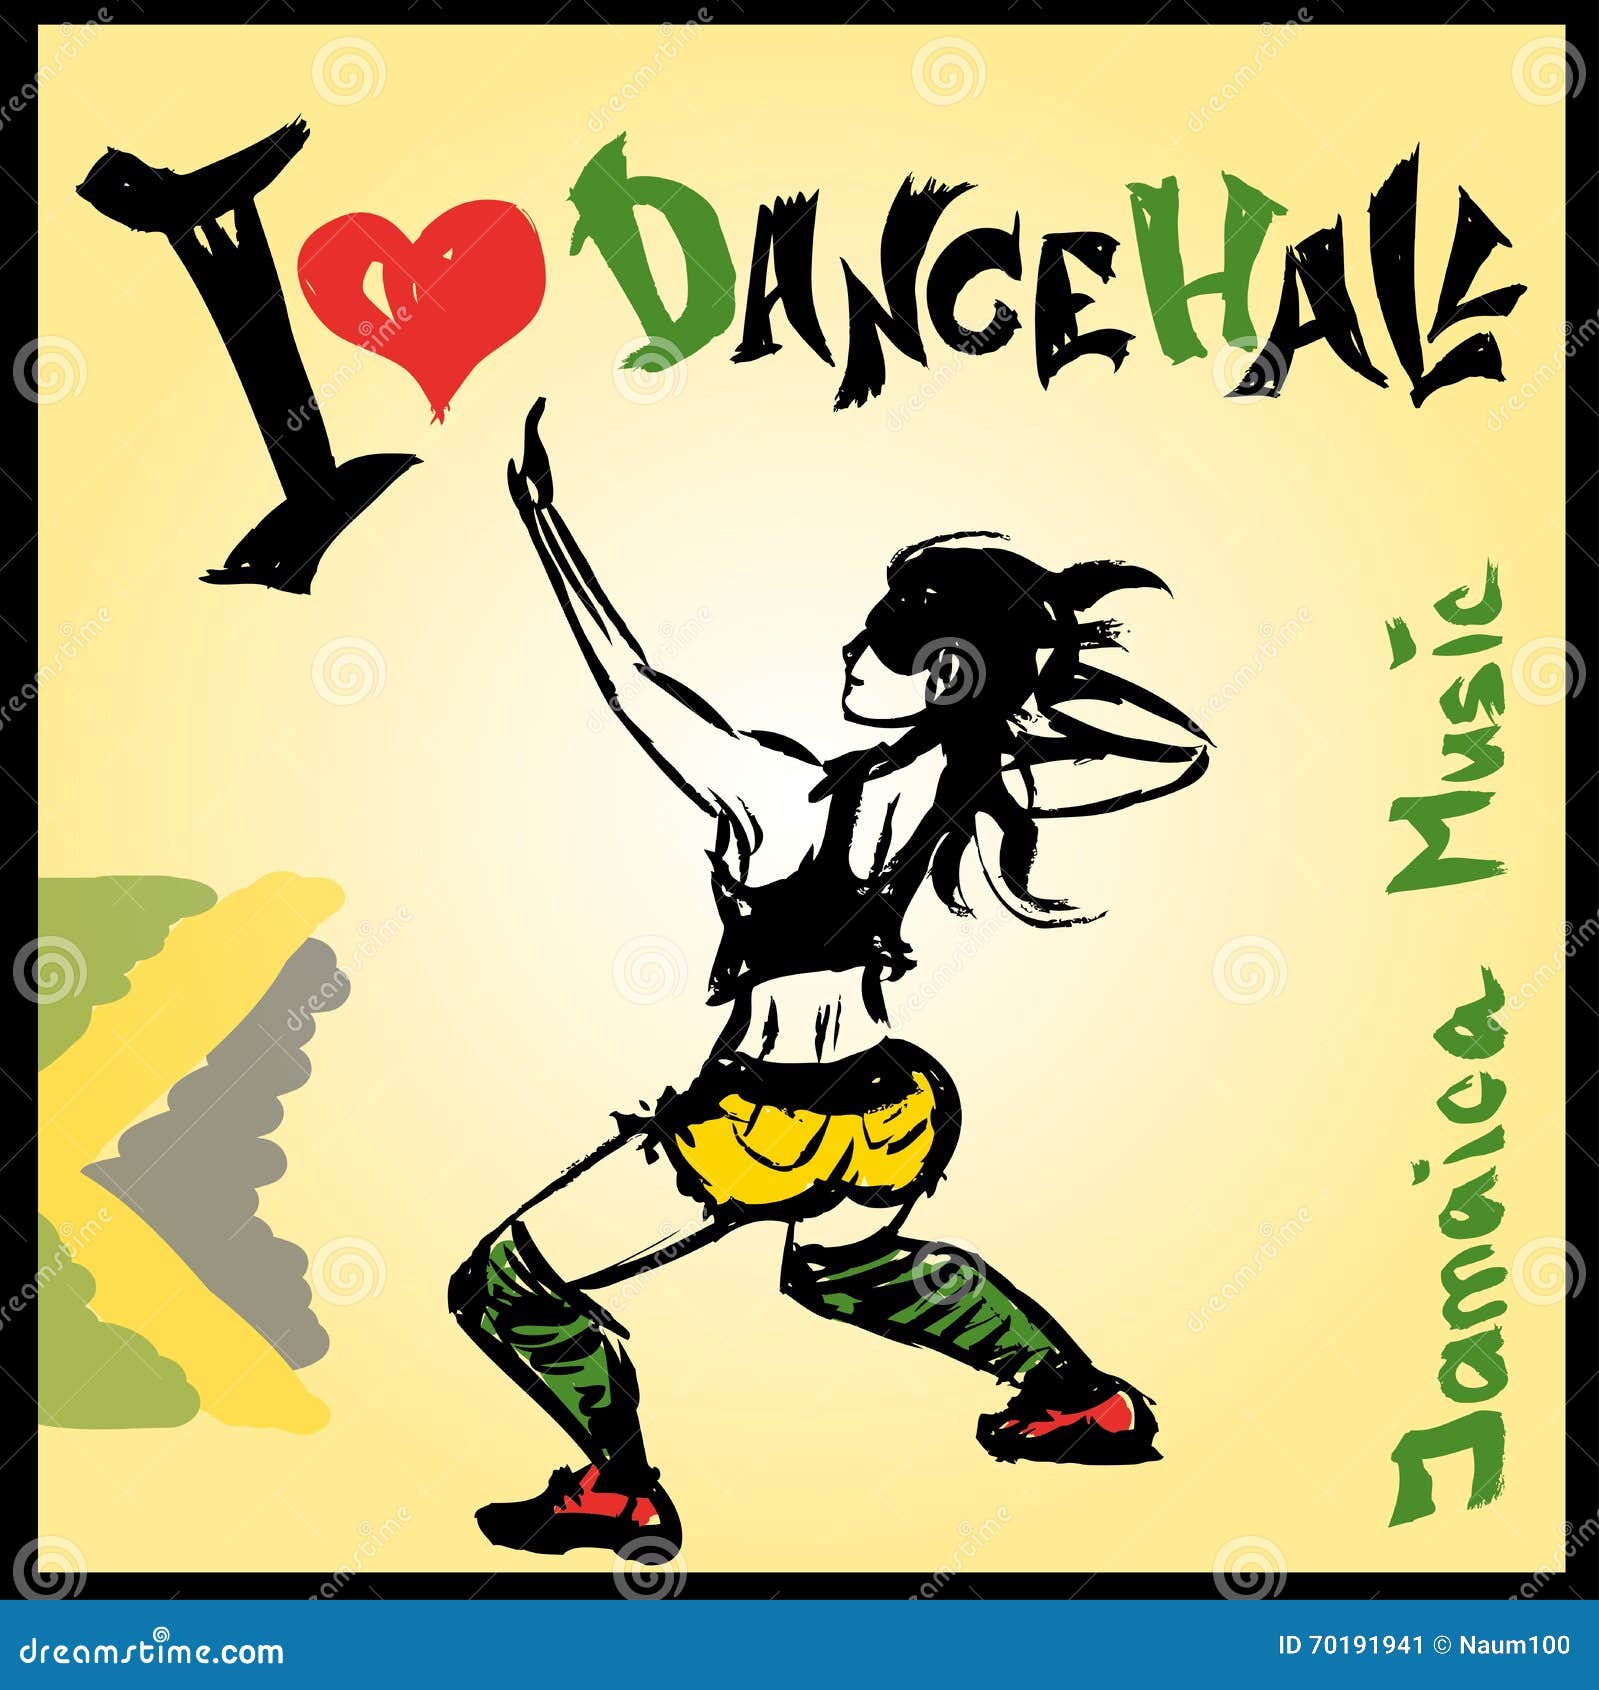 dancer dancehall style, hand drawing